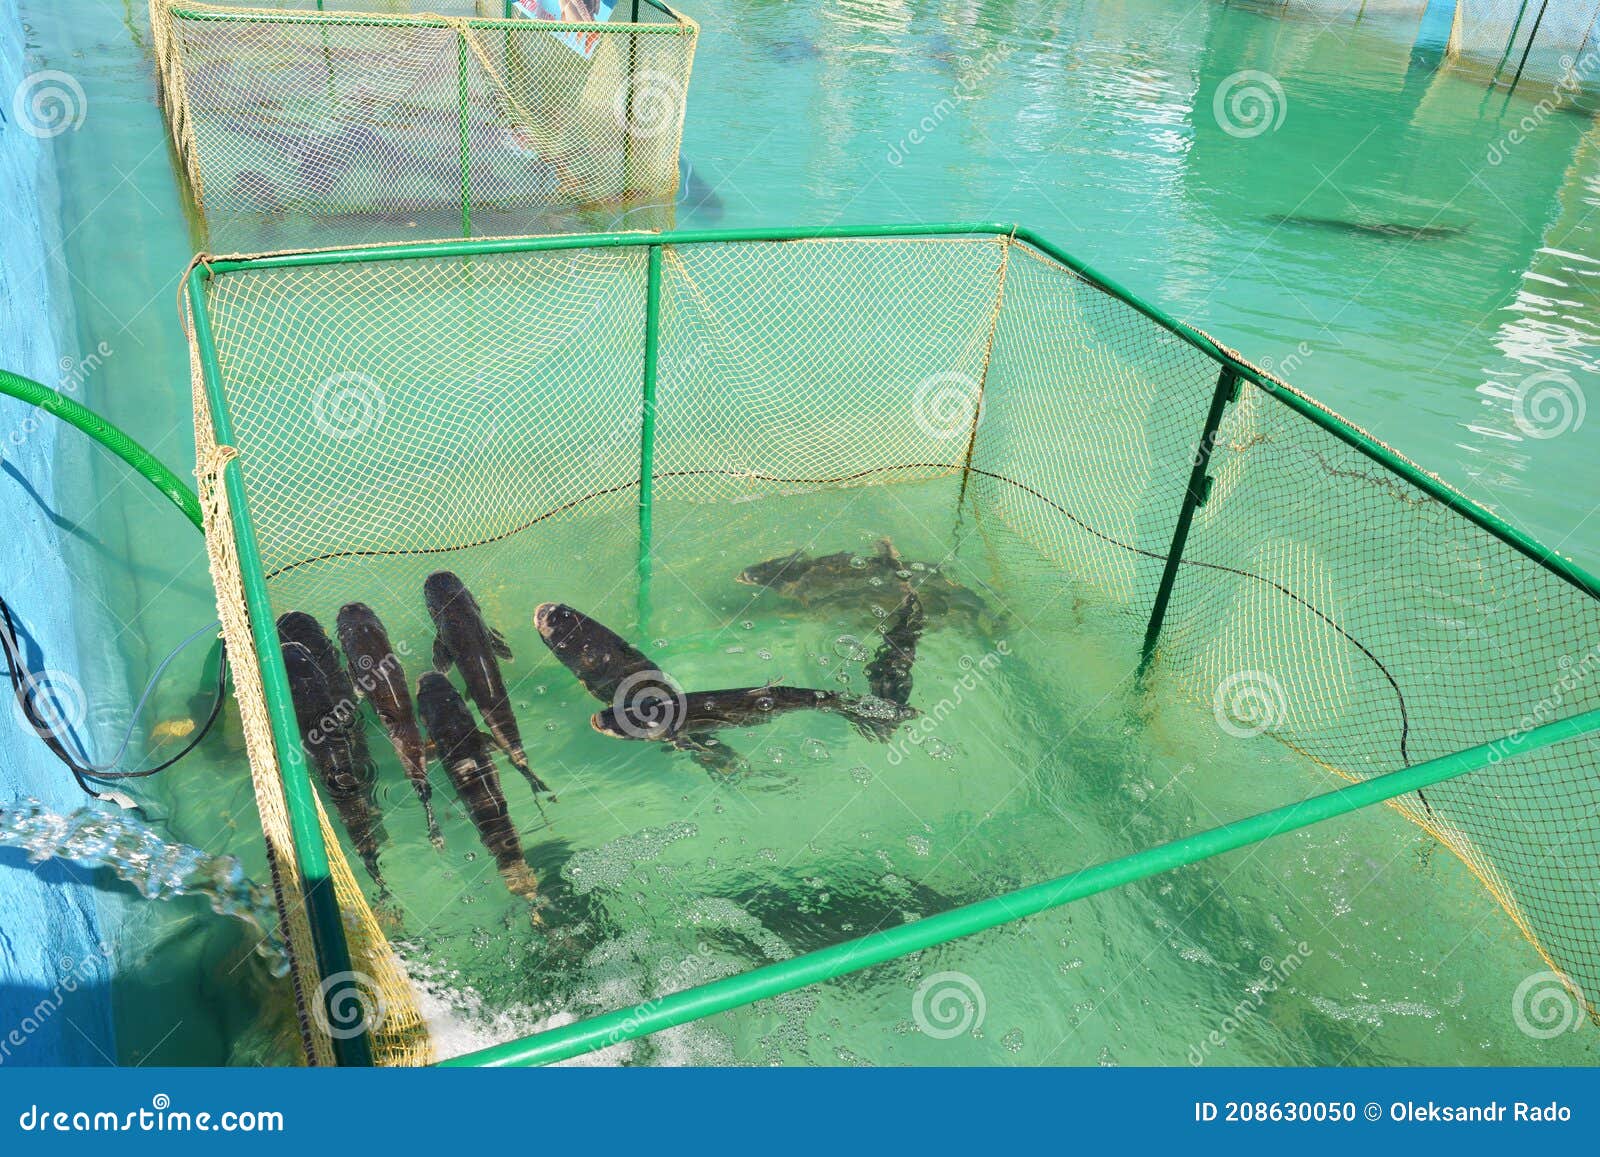 Fish Farming in Tanks, a Net Cage As a Form of Aquaculture, when